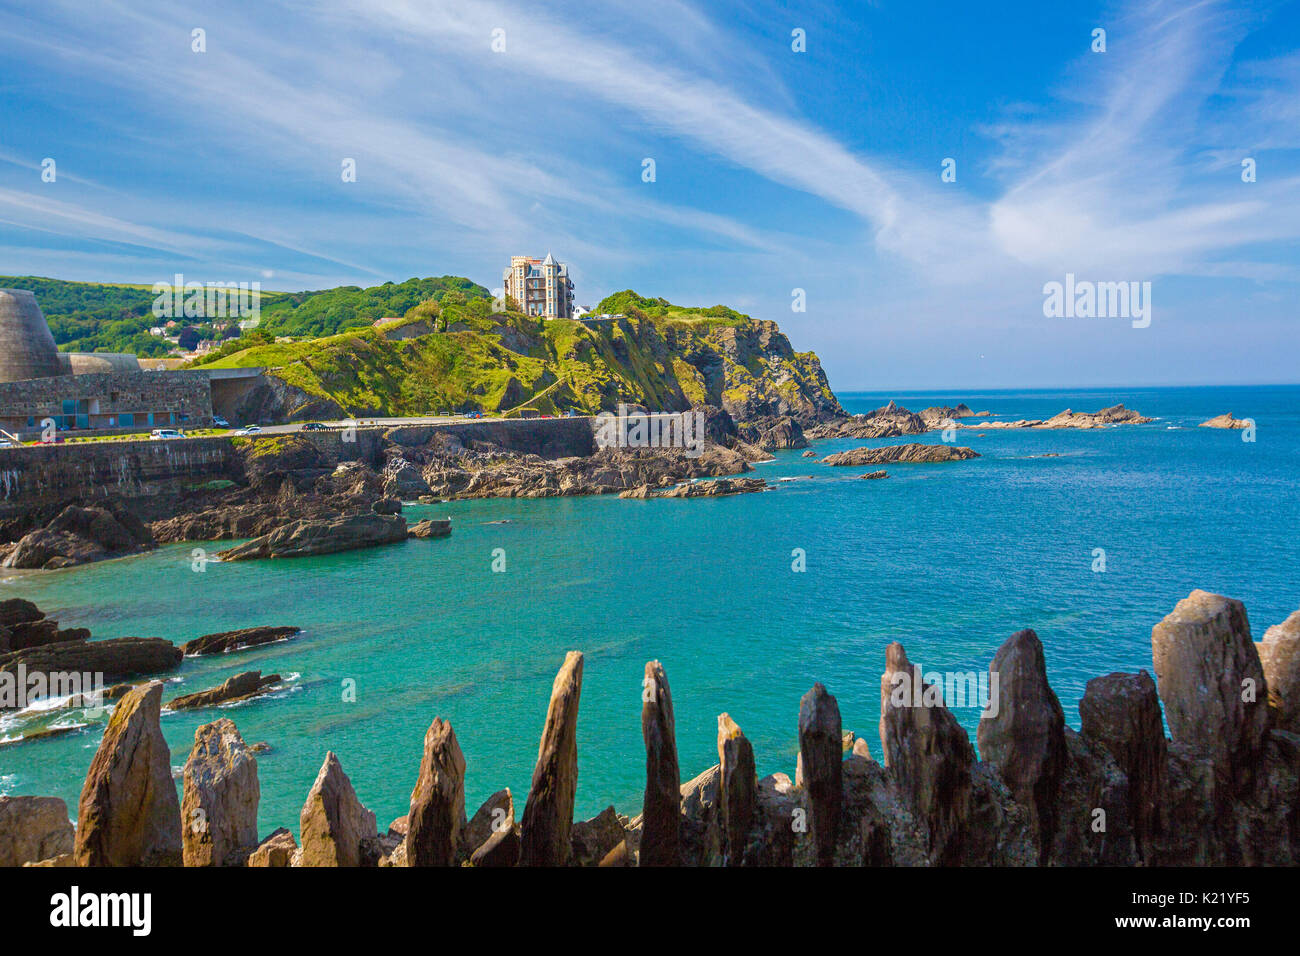 Sprawling town hemmed by sheltered beach, and blue waters of ocean lapping at rocky coastline under blue sky at Ilfracombe, North Devon, England Stock Photo